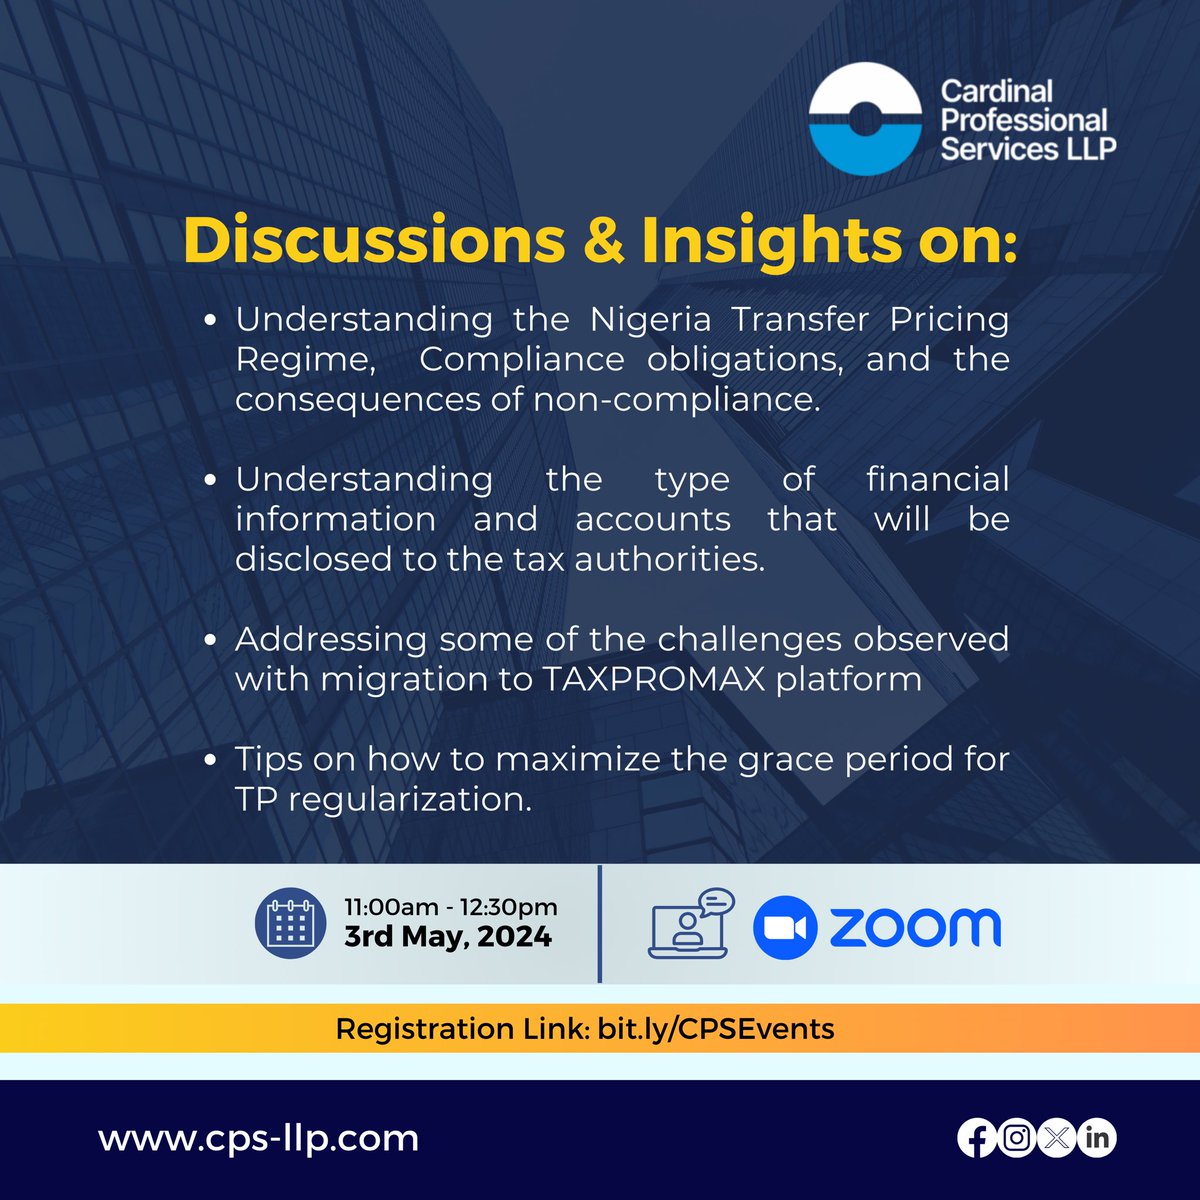 Confused by Transfer Pricing in Nigeria? 🇳🇬

Join our FREE webinar (Friday, May 3rd, 11 AM WAT!). Get expert insights & ensure compliance!

Register: bit.ly/CPSEvents

P.S. Share with colleagues!

#TransferPricing #Nigeria #Webinar #Tax #Business